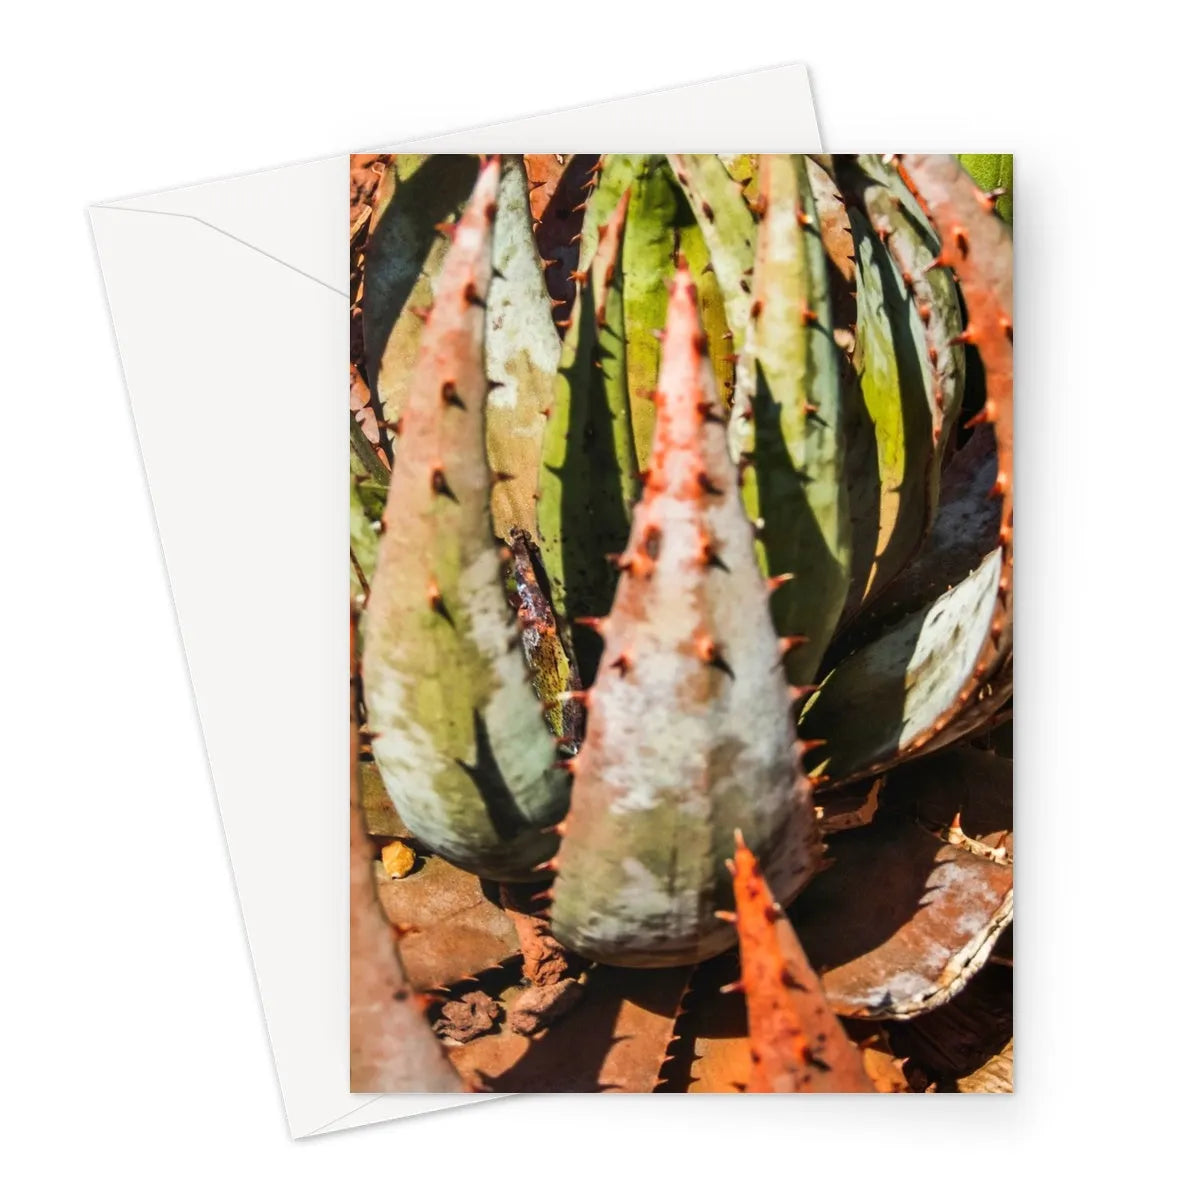 Layer Cake - Modern Botanical Succulent Art Greeting Card - A5 Portrait / 1 Card - Greeting & Note Cards - Aesthetic Art